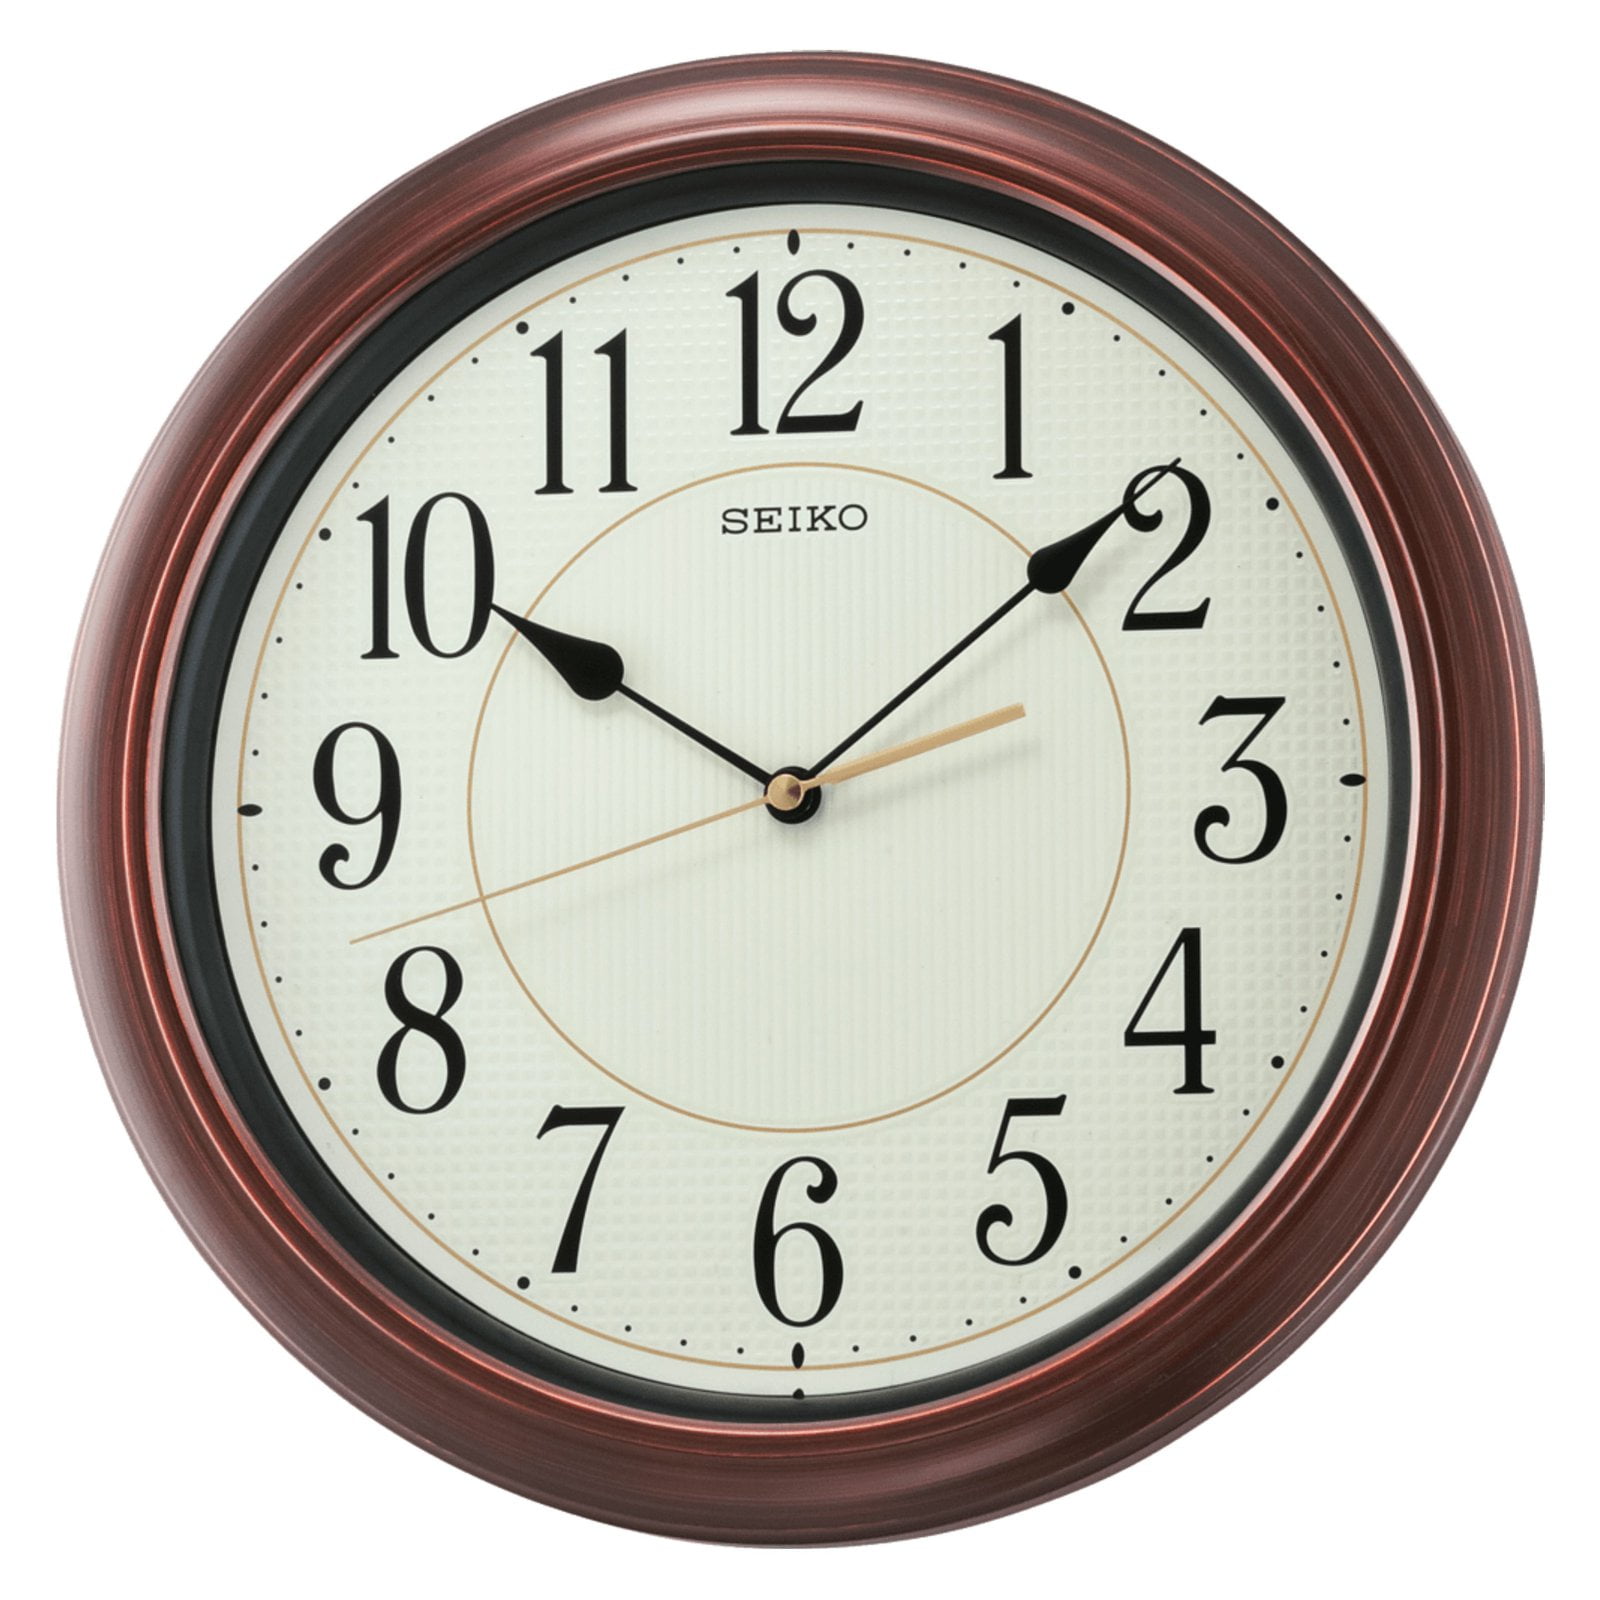 Foxtop Silent Non-Ticking Round Quartz Decorative Battery Operated Retro Wall Clock with Contour Design for Living Room Kitchen Home Office School Classroom 12 inch Antique Cream